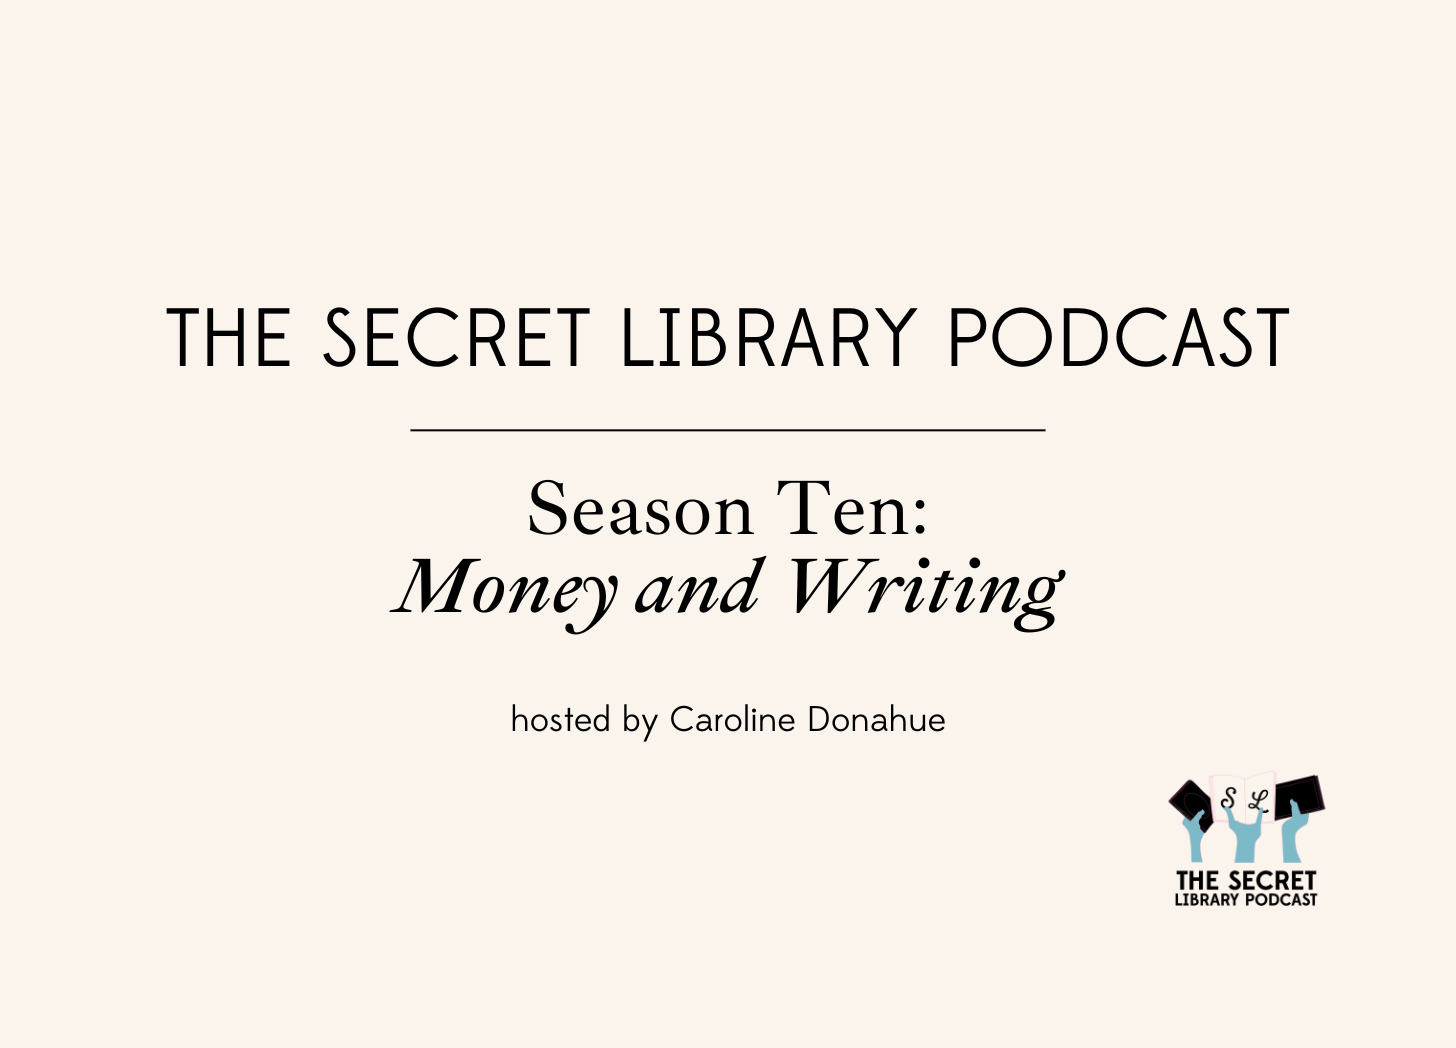 Cream background with text: The Secret Library Podcast. Season Ten: Money and Writing. Hosted by: Caroline Donahue. The Secret Library logo, blue hands holding three books up above the name of the show is in the bottom-right corner.